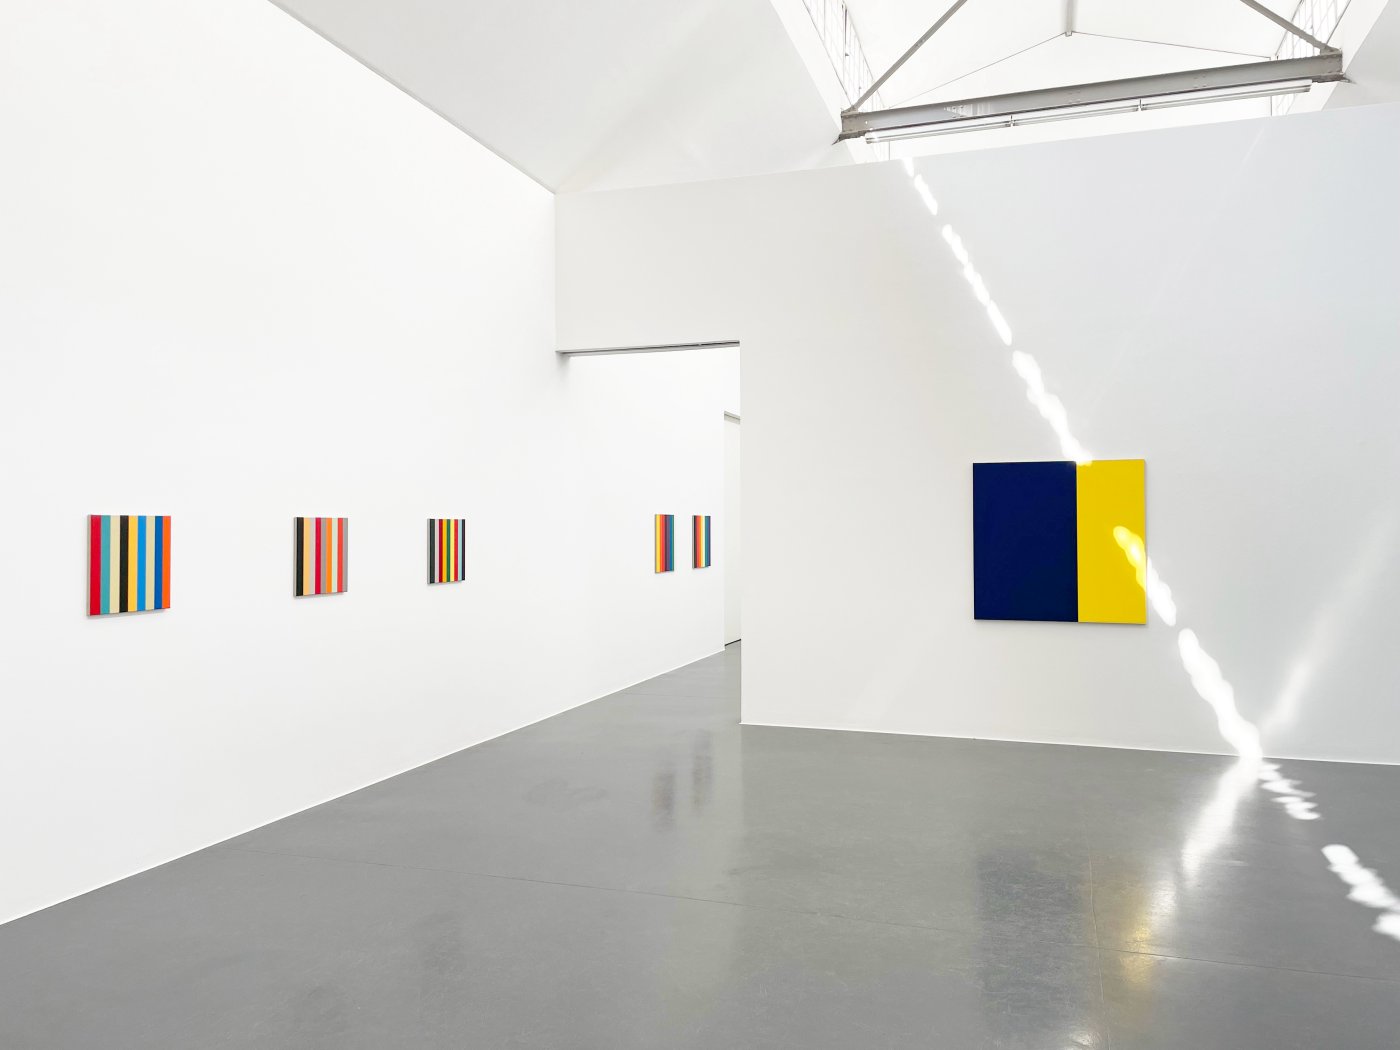 Installation image for Steven Aalders: Elements, at Walter Storms Galerie